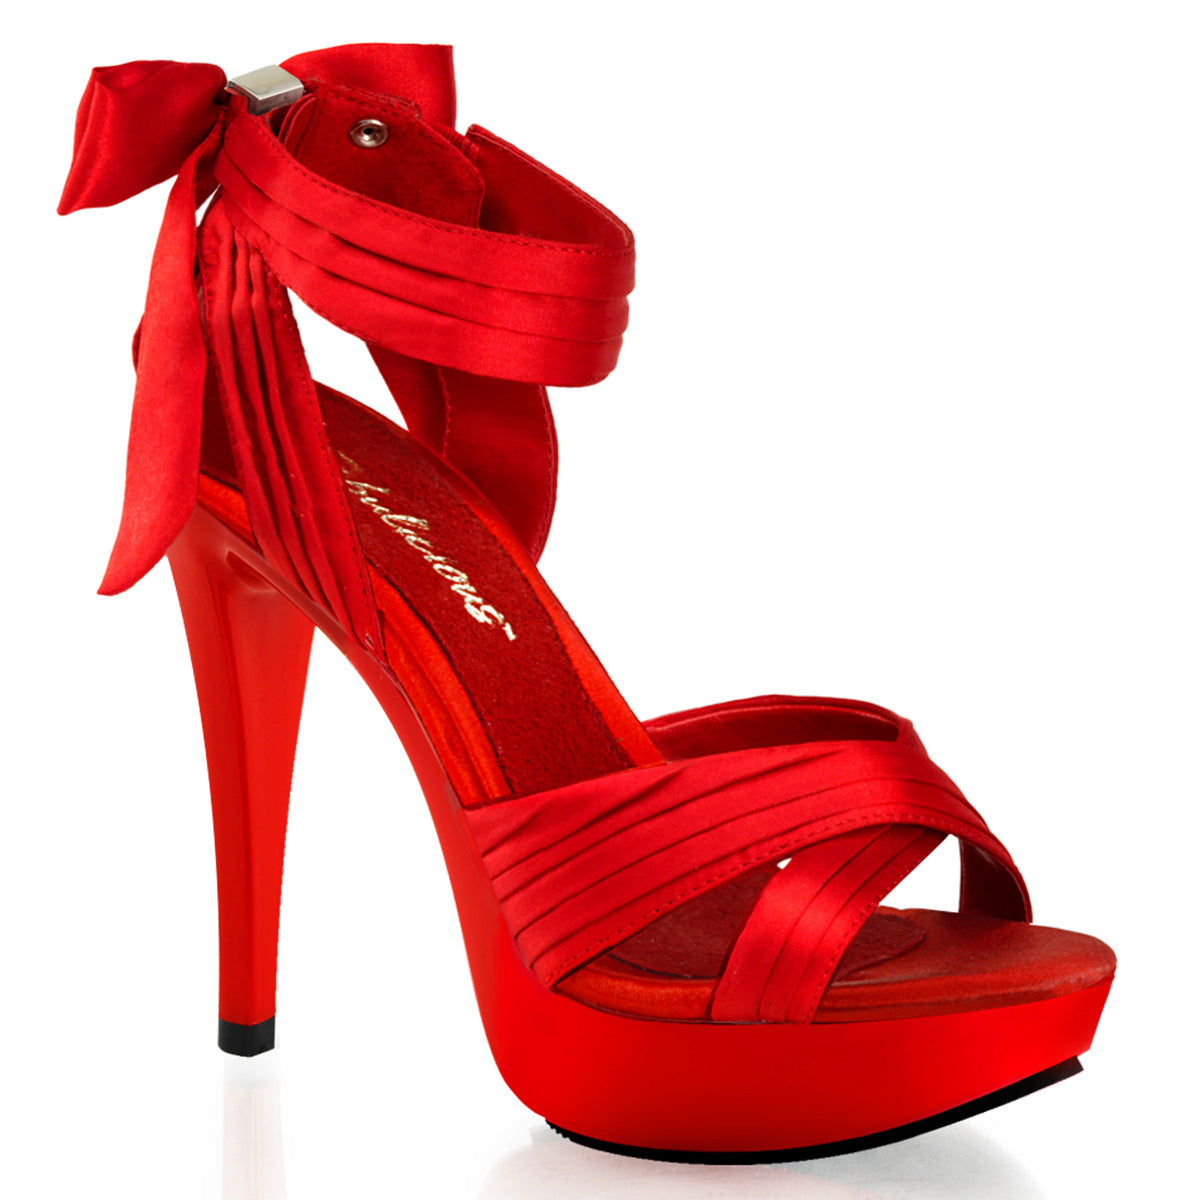 Fabulicious Womens Sandals COCKTAIL-568 Red Satin/Red